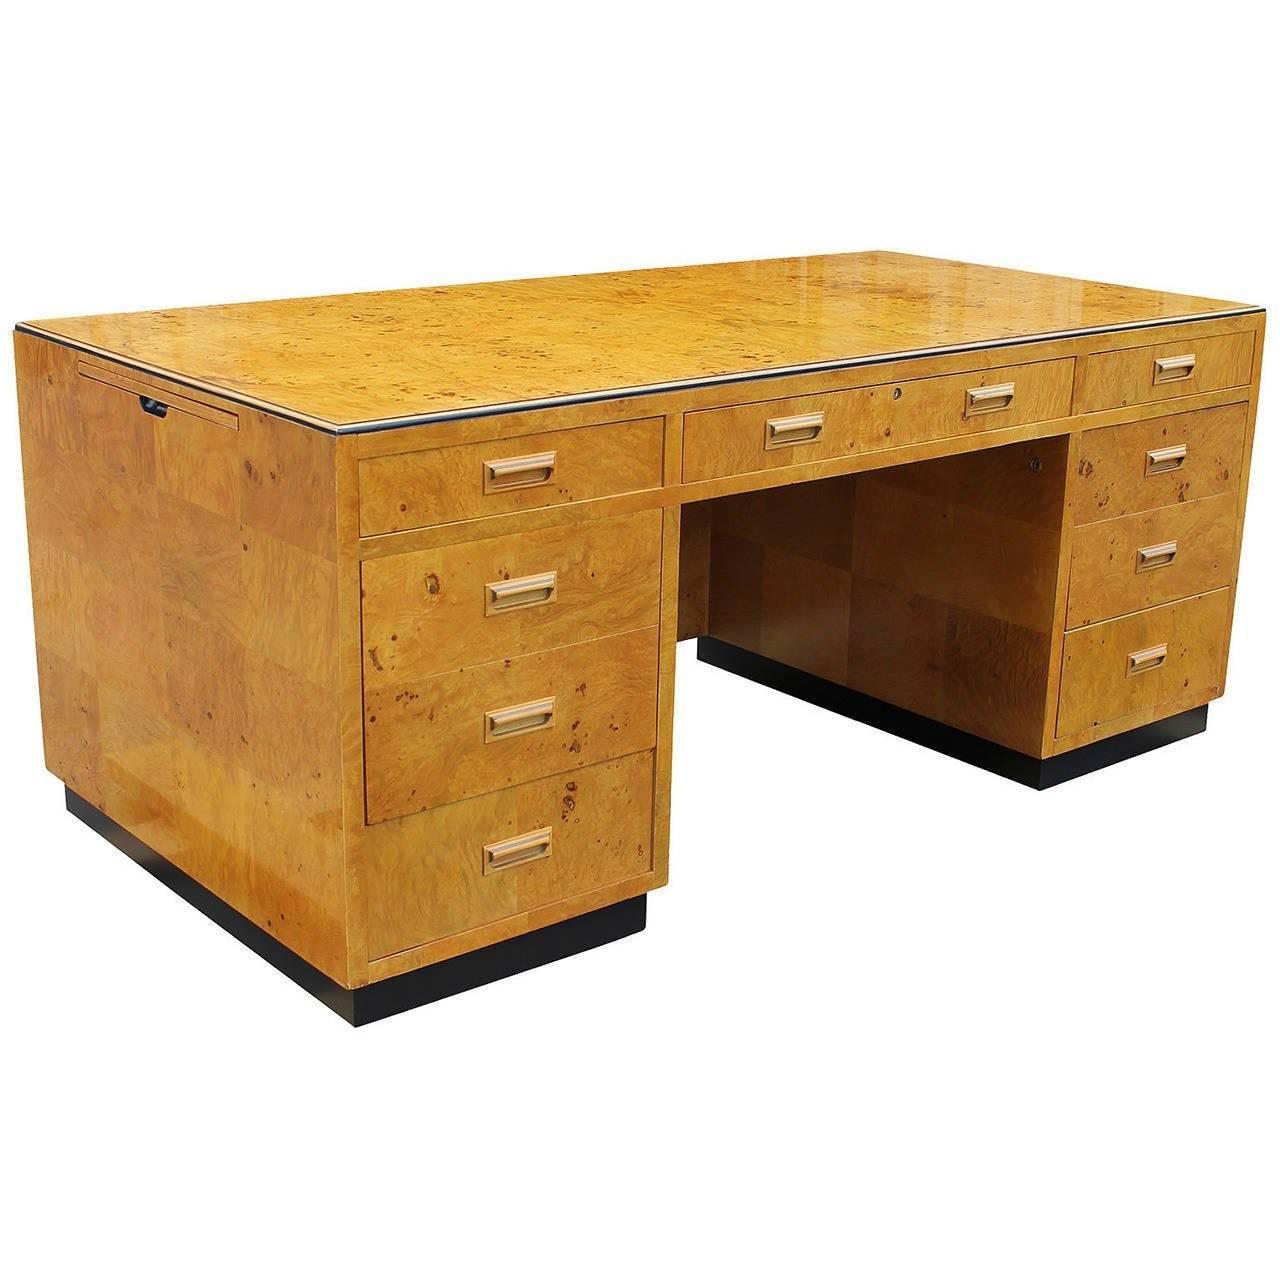 Beautiful burl wood executive desk with glass top by Henredon, series II. Exceptional solid construction, desk is veneered in blonde burl wood atop a plinth base finished in black lacquer. It has three pull-out writing surfaces: one on the right,